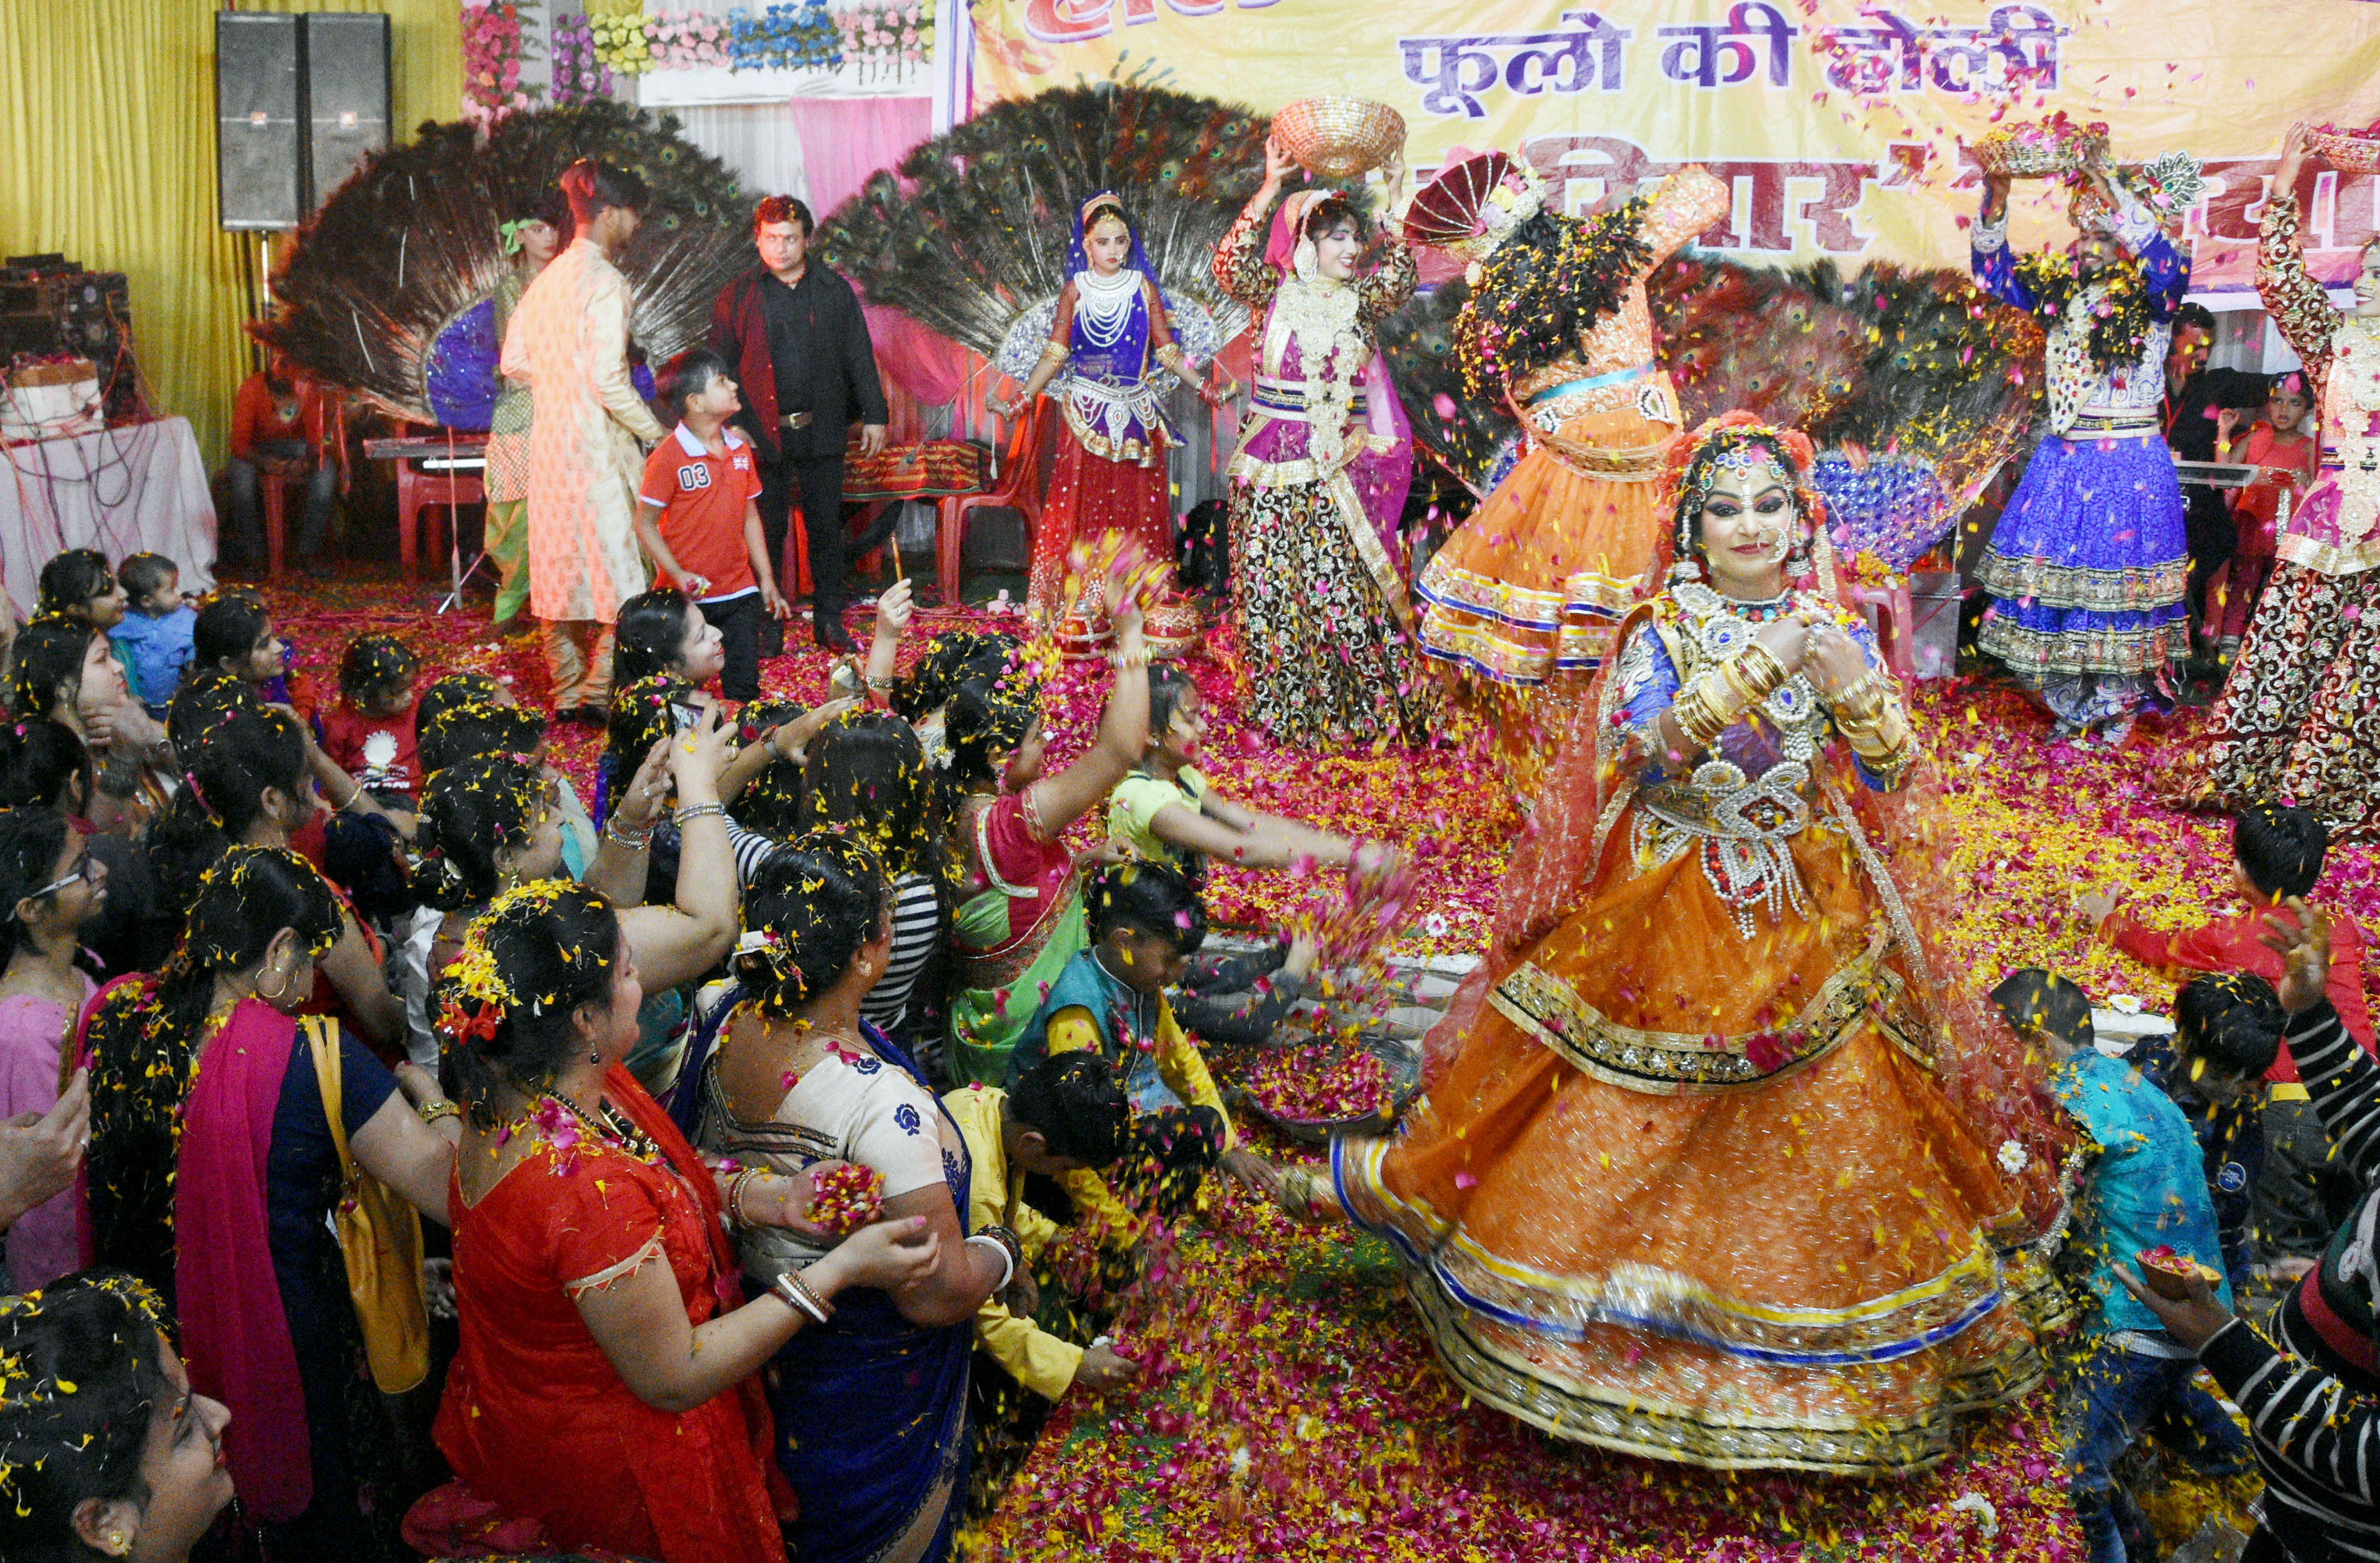 Artists dressed up lord krishna and radha play with flower petals during the holi celebration